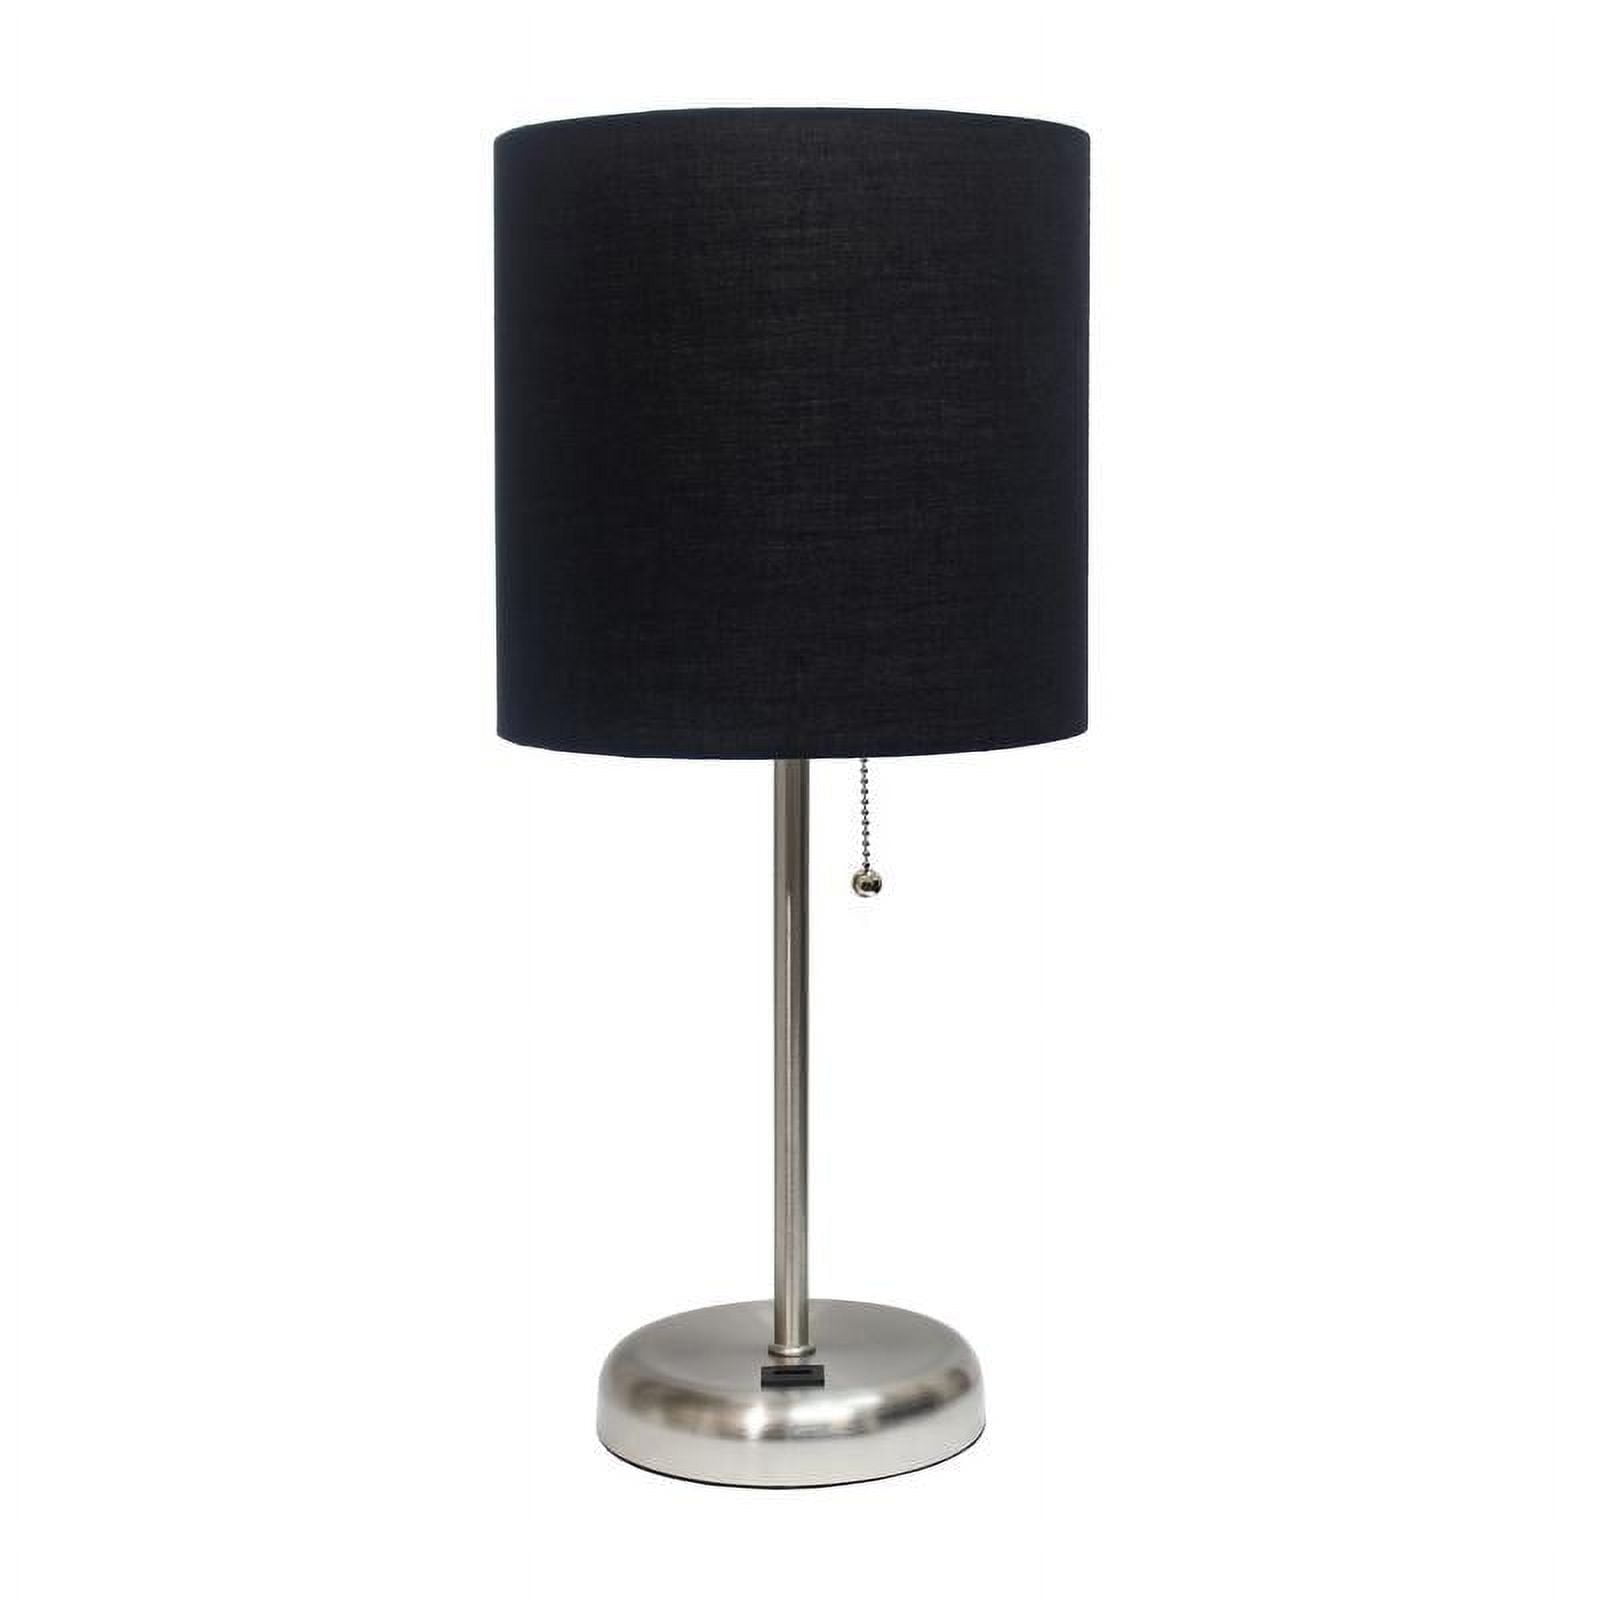 Lt2044-blk 60w Stick Lamp With Usb Charging Port & Fabric Shade - Black